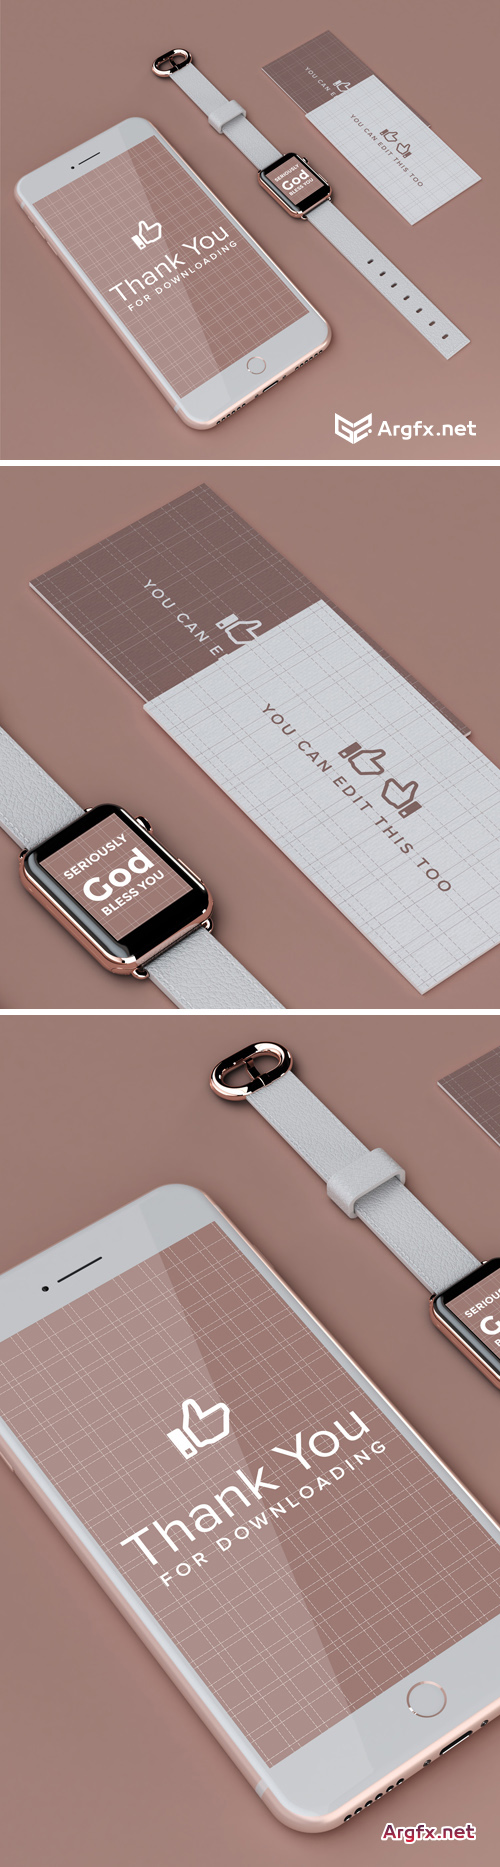 IPhone, Watch And Business Card Mockup